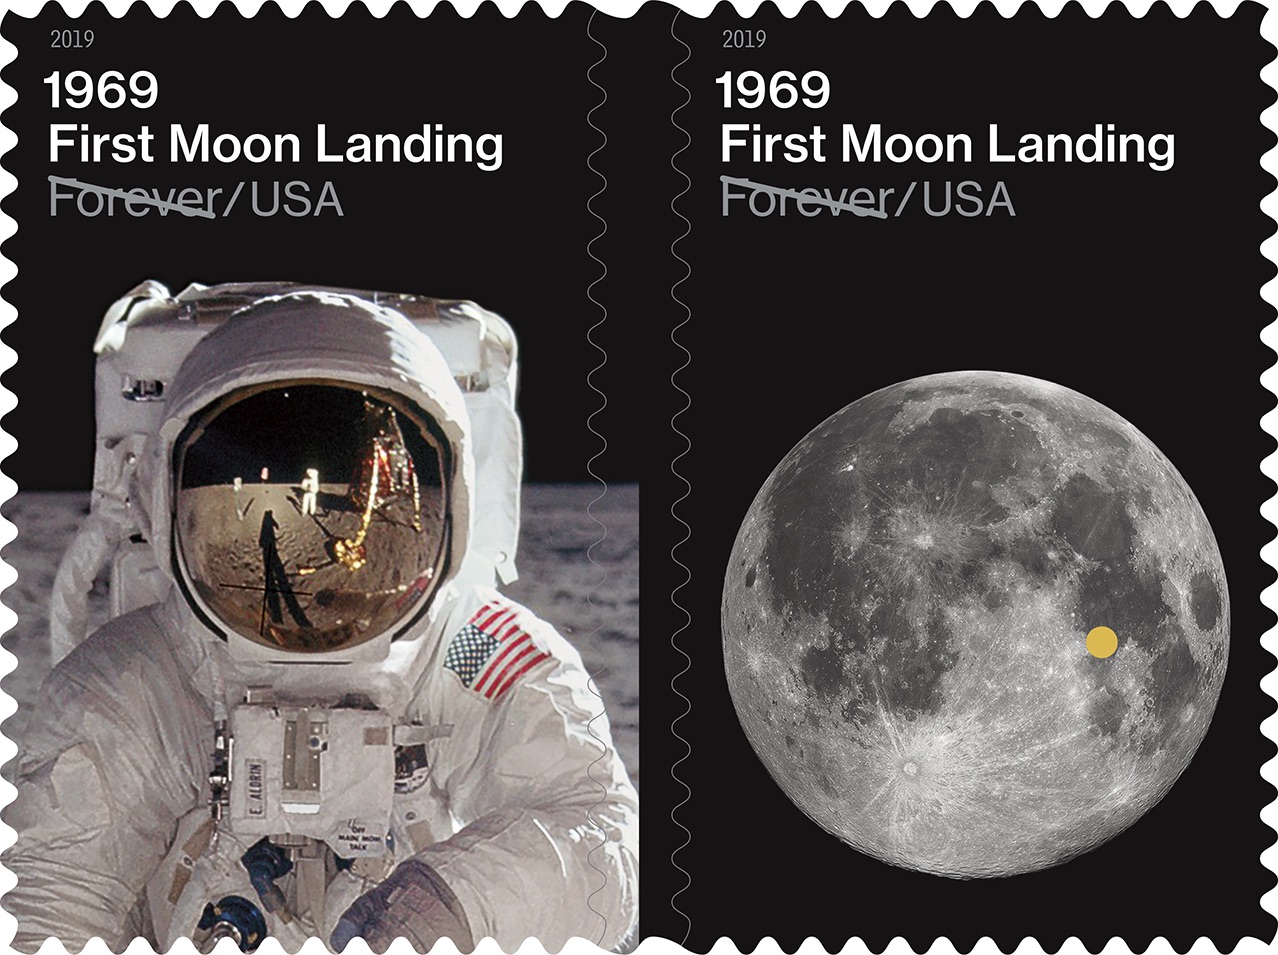 The U.S. Postal Service will issue these stamps July 19 to commemorate the 50th anniversary of the Apollo 11 Moon landing. 